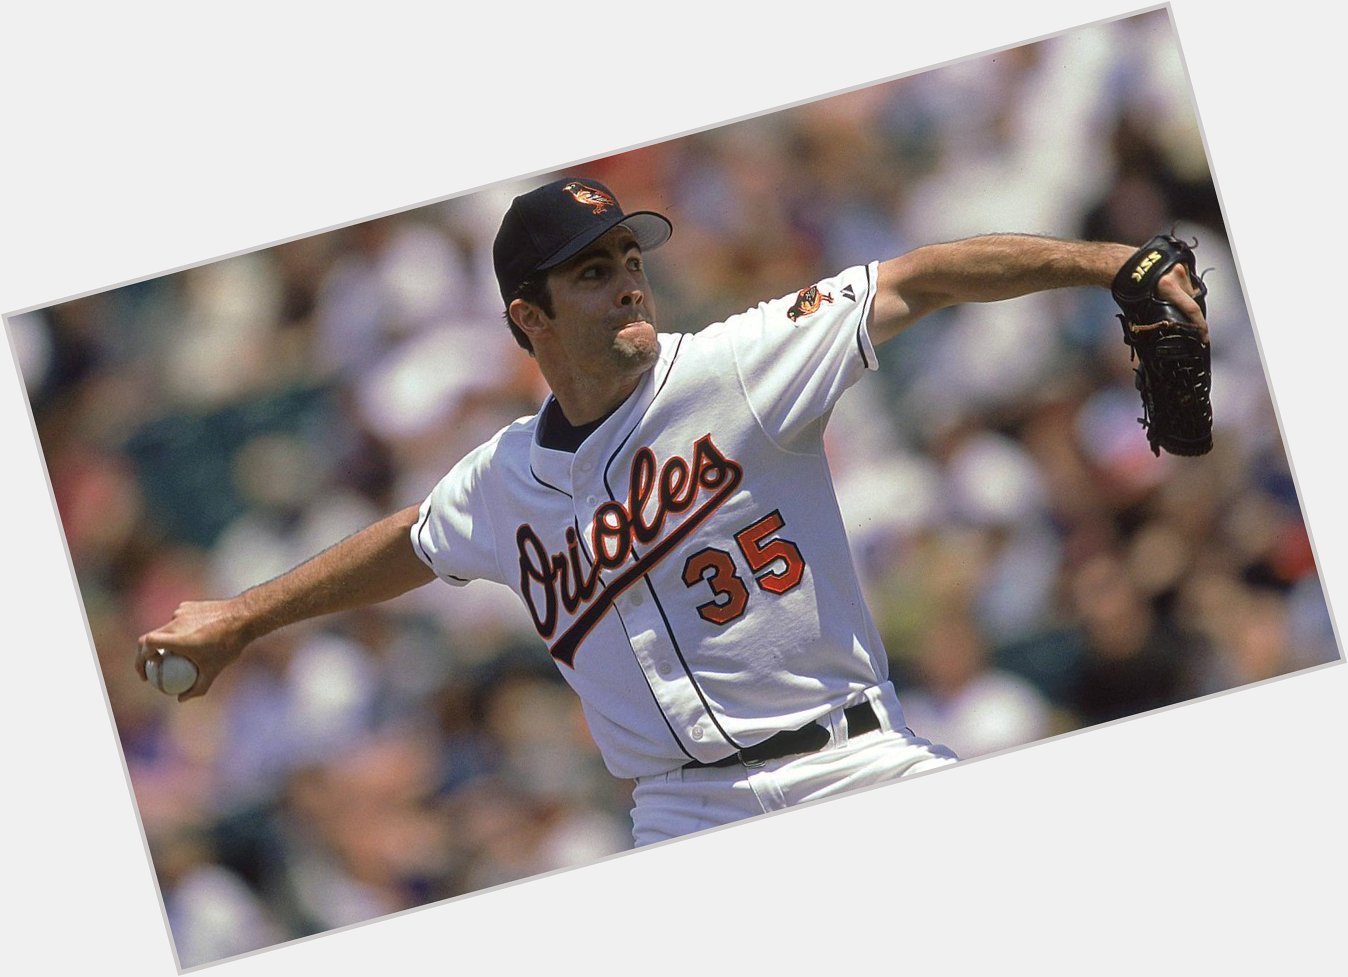 Happy birthday, Moose! Five-time All-Star Mike Mussina is 46 today. 